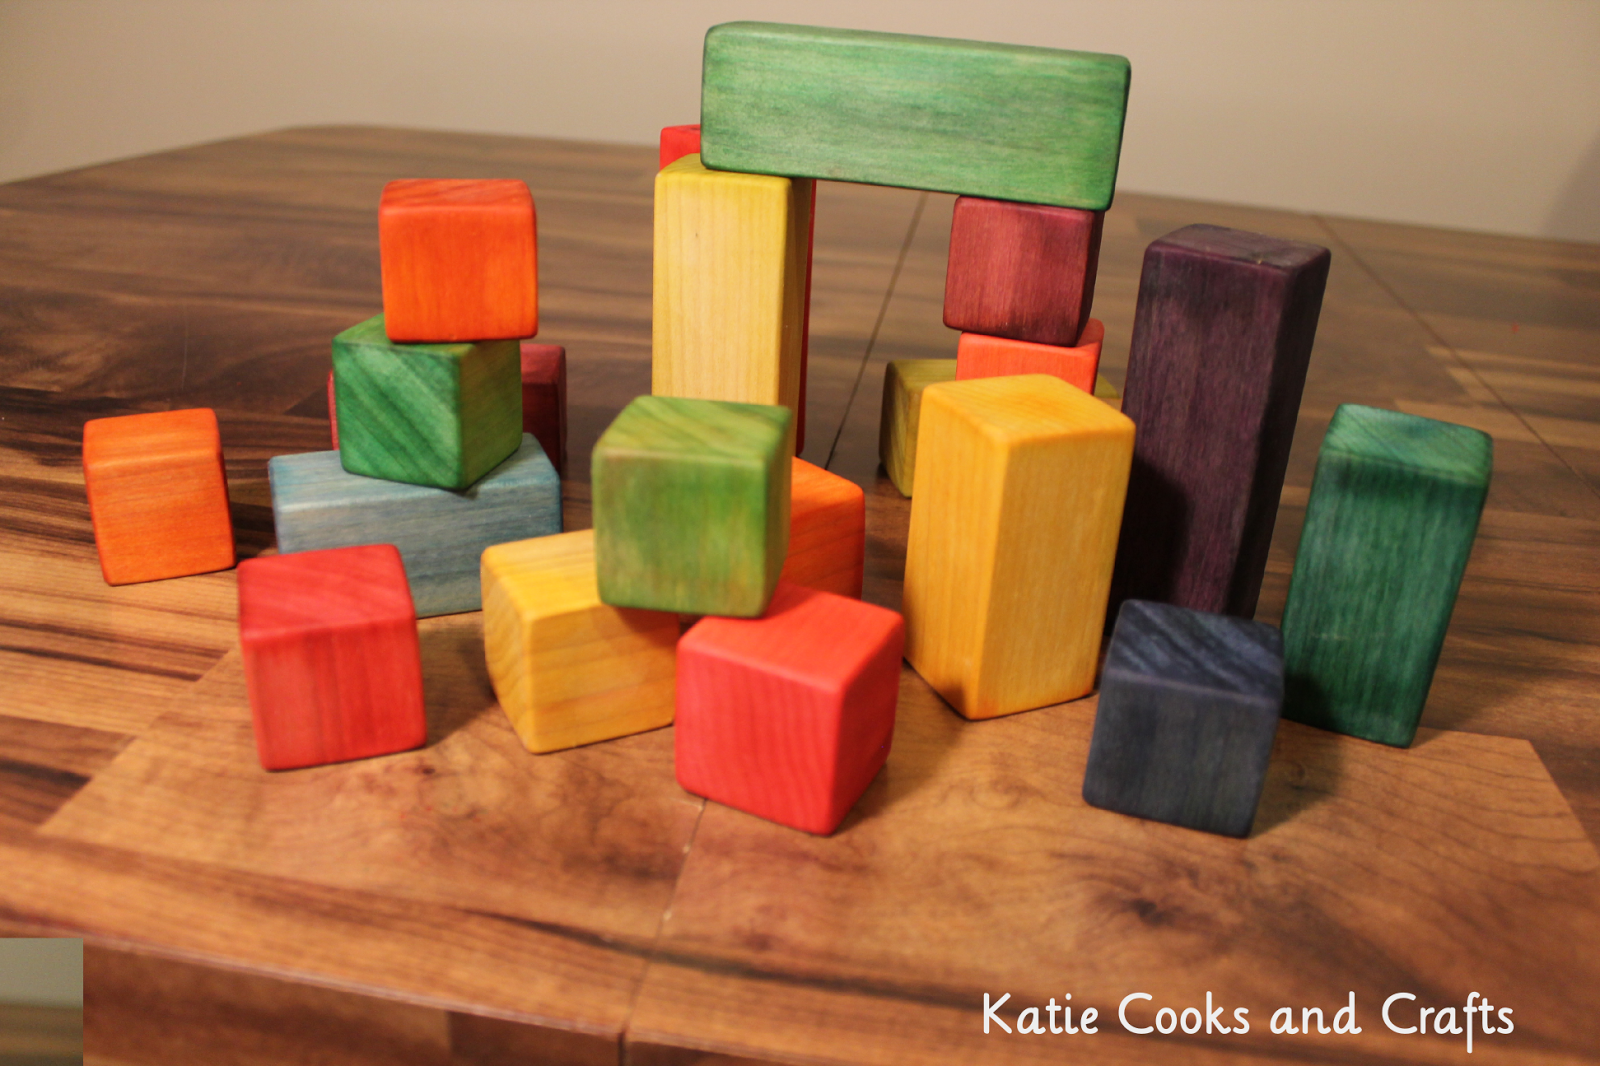 Katie Cooks and Crafts: DIY Wooden Blocks ~ Easy Wood Toy